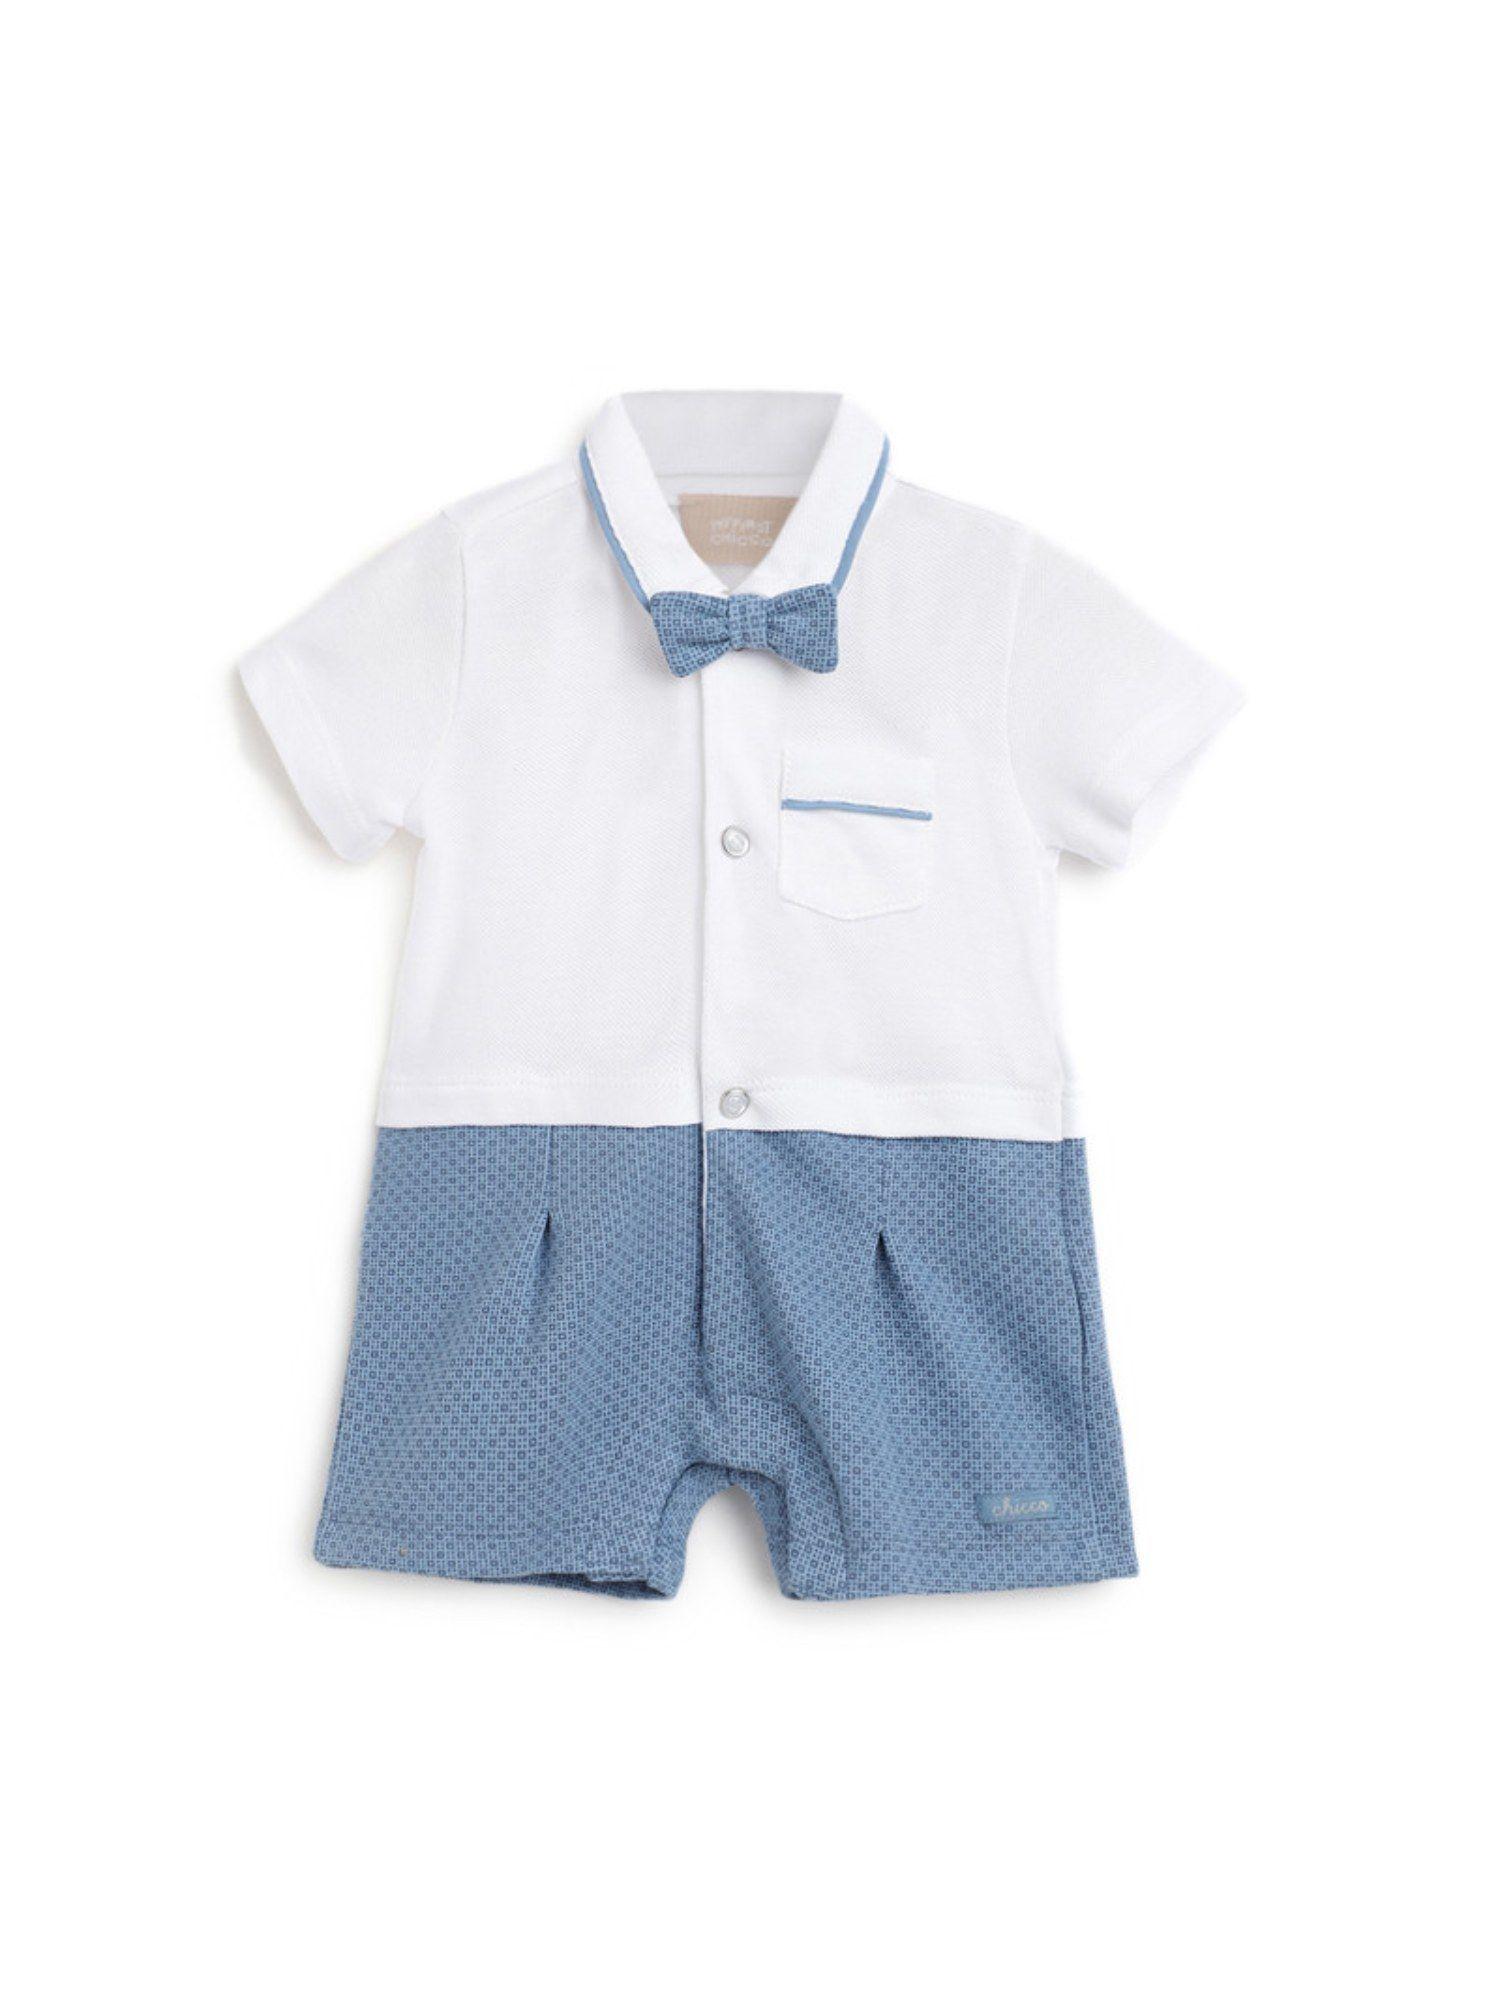 boys printed blue knitted romper